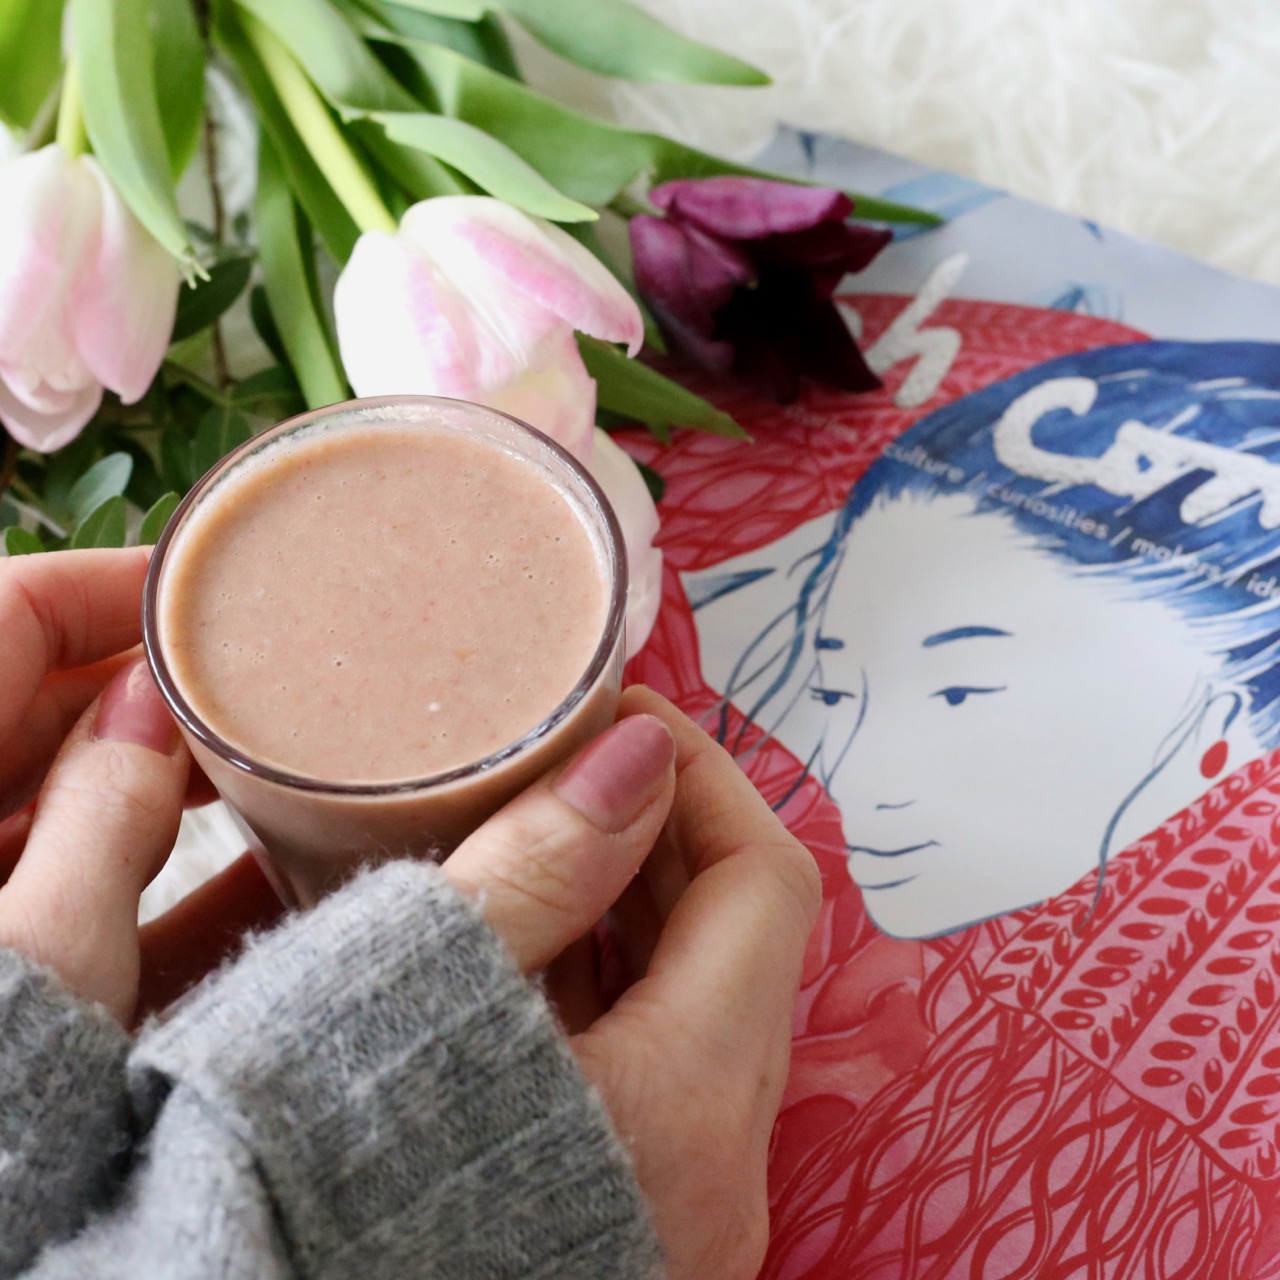 Cold remedies and Oh Comely magazine